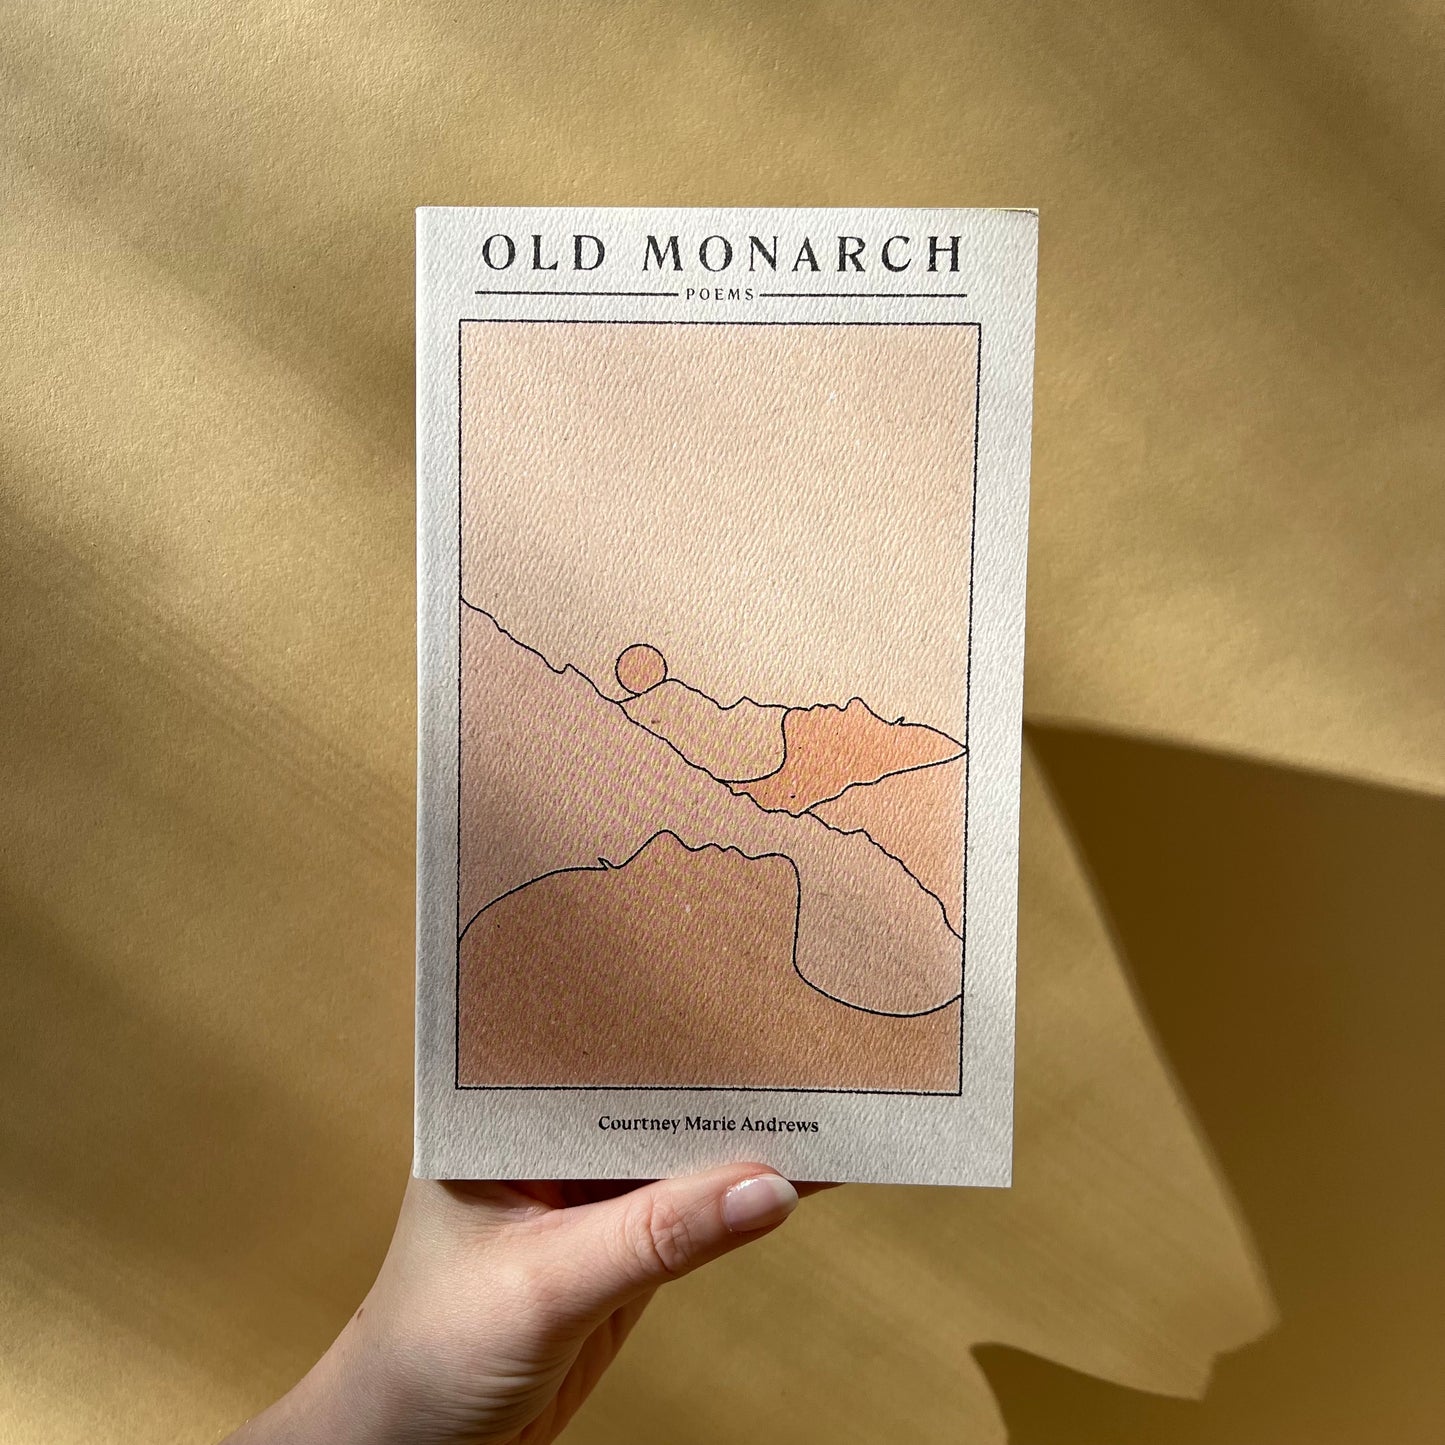 old monarch: poems